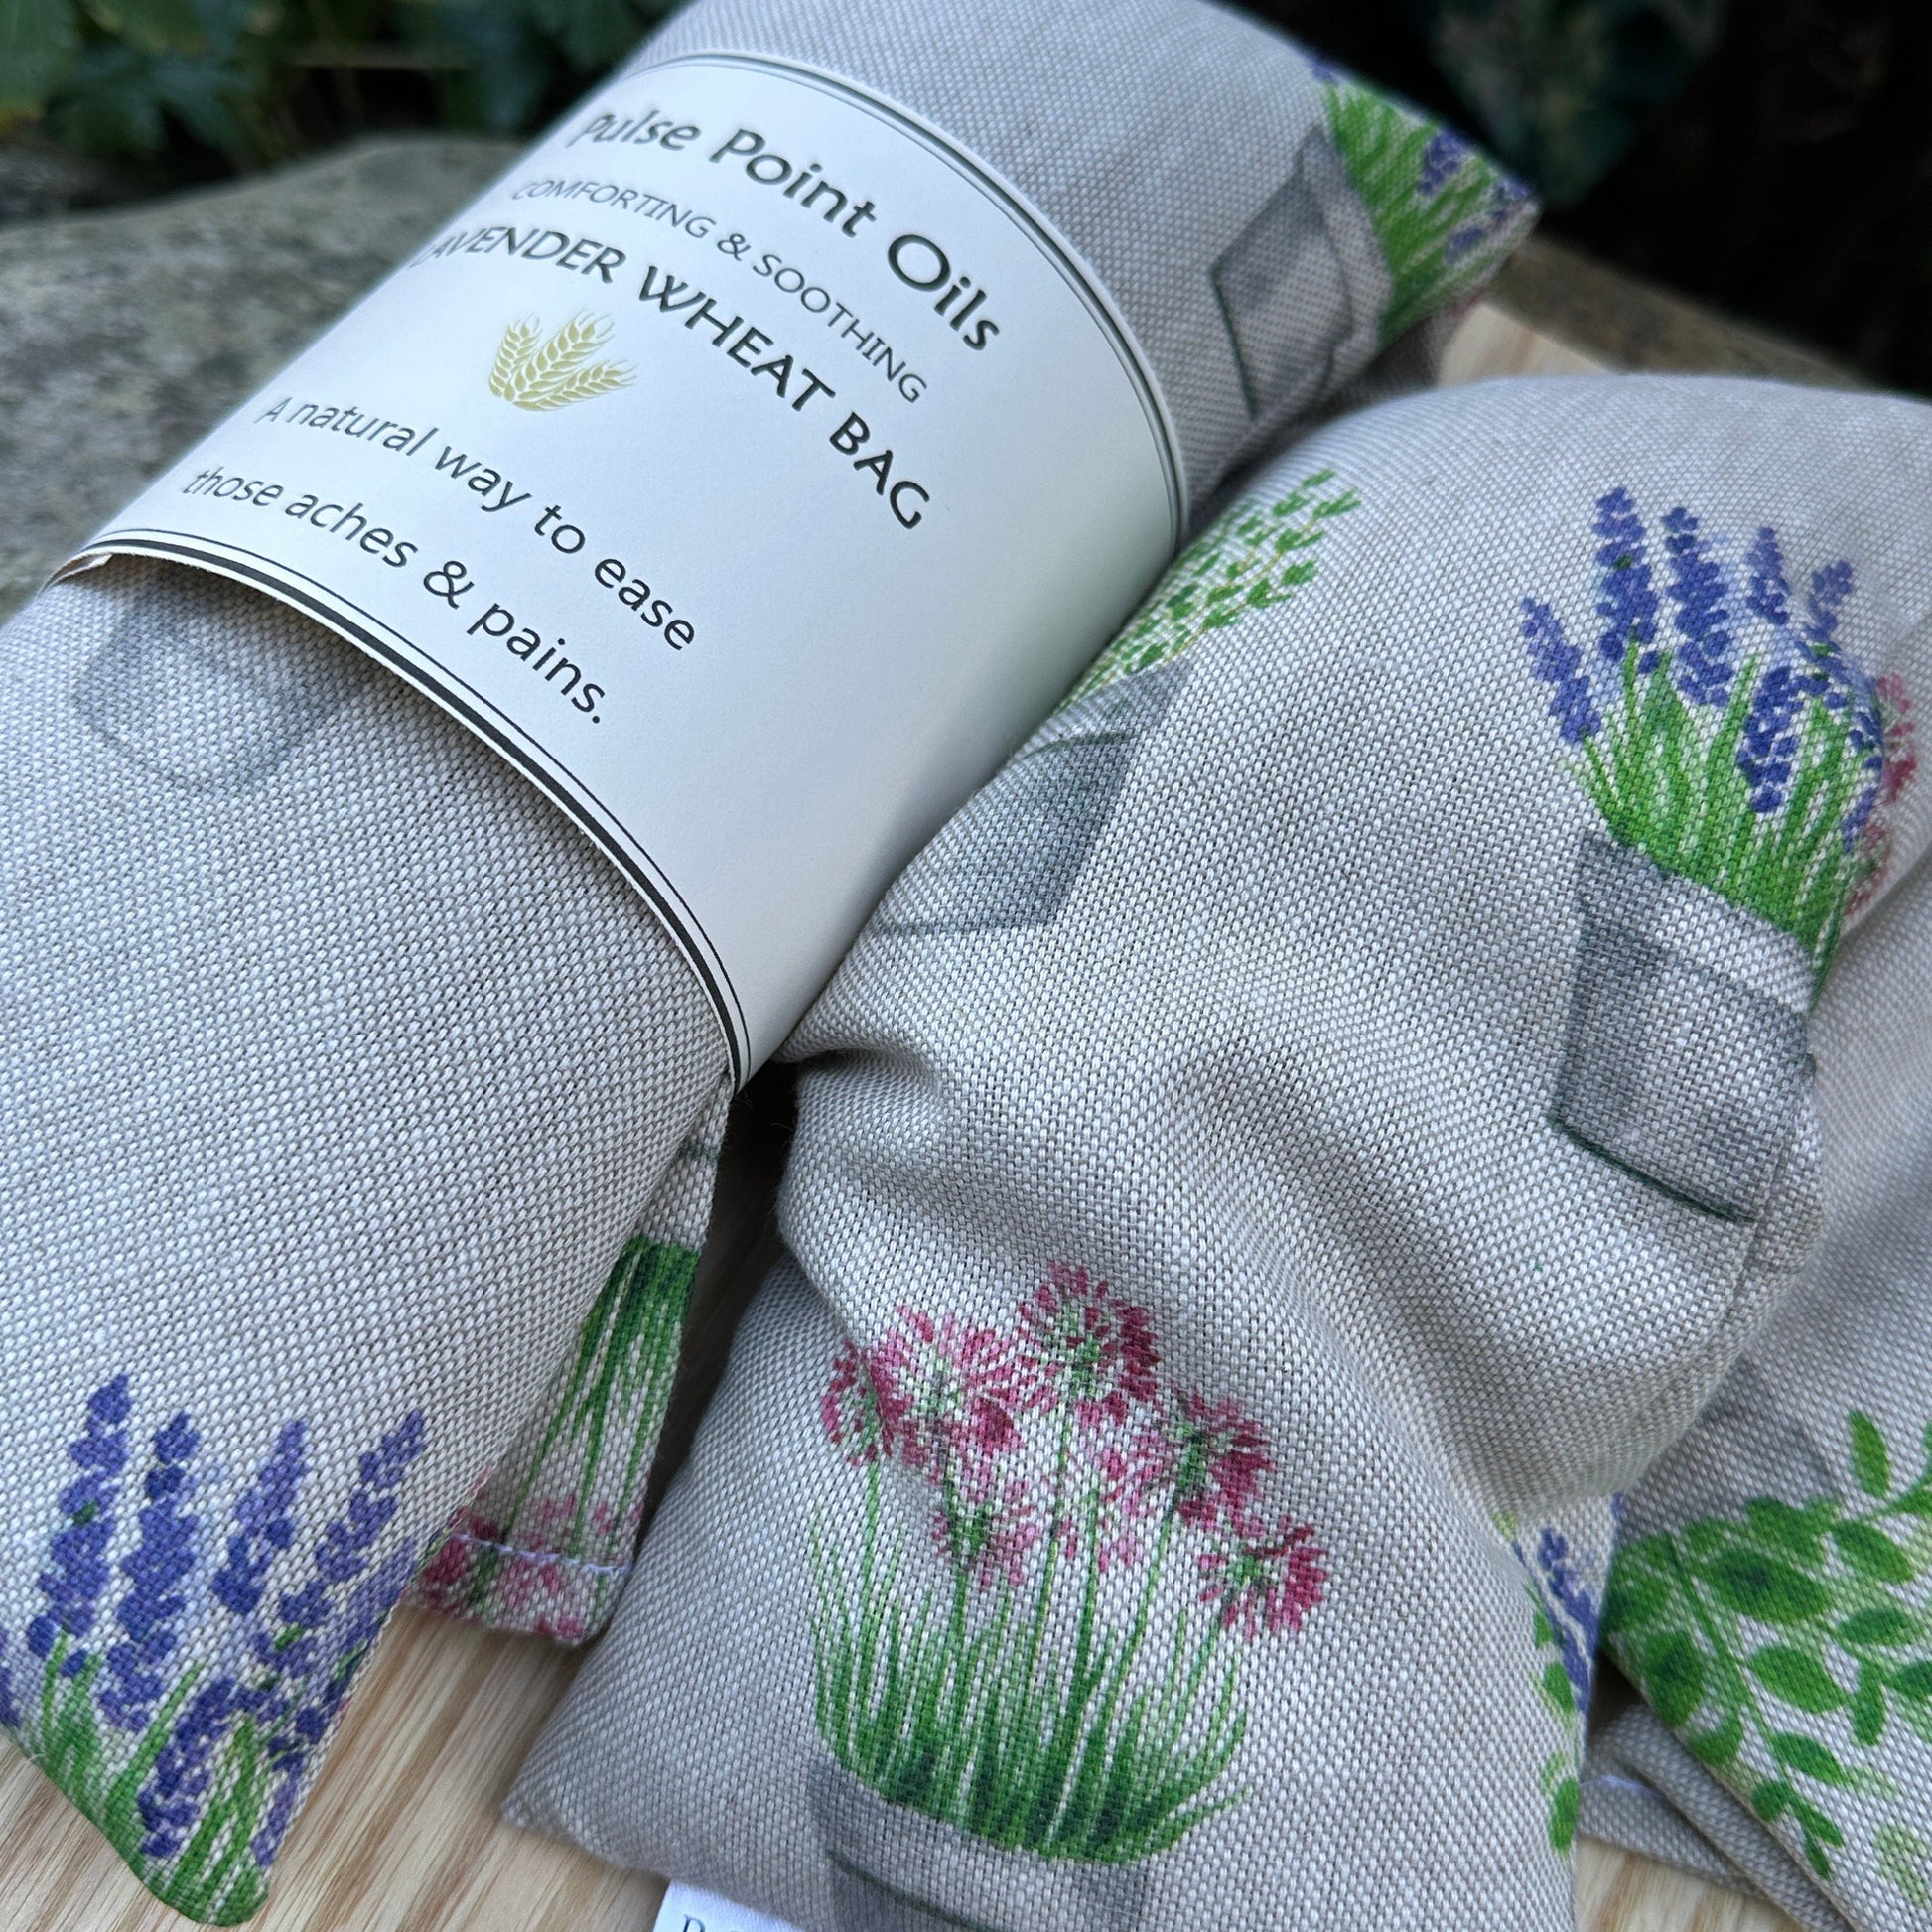 Lavender scented wheat bags. Potted plants printed cotton wrap